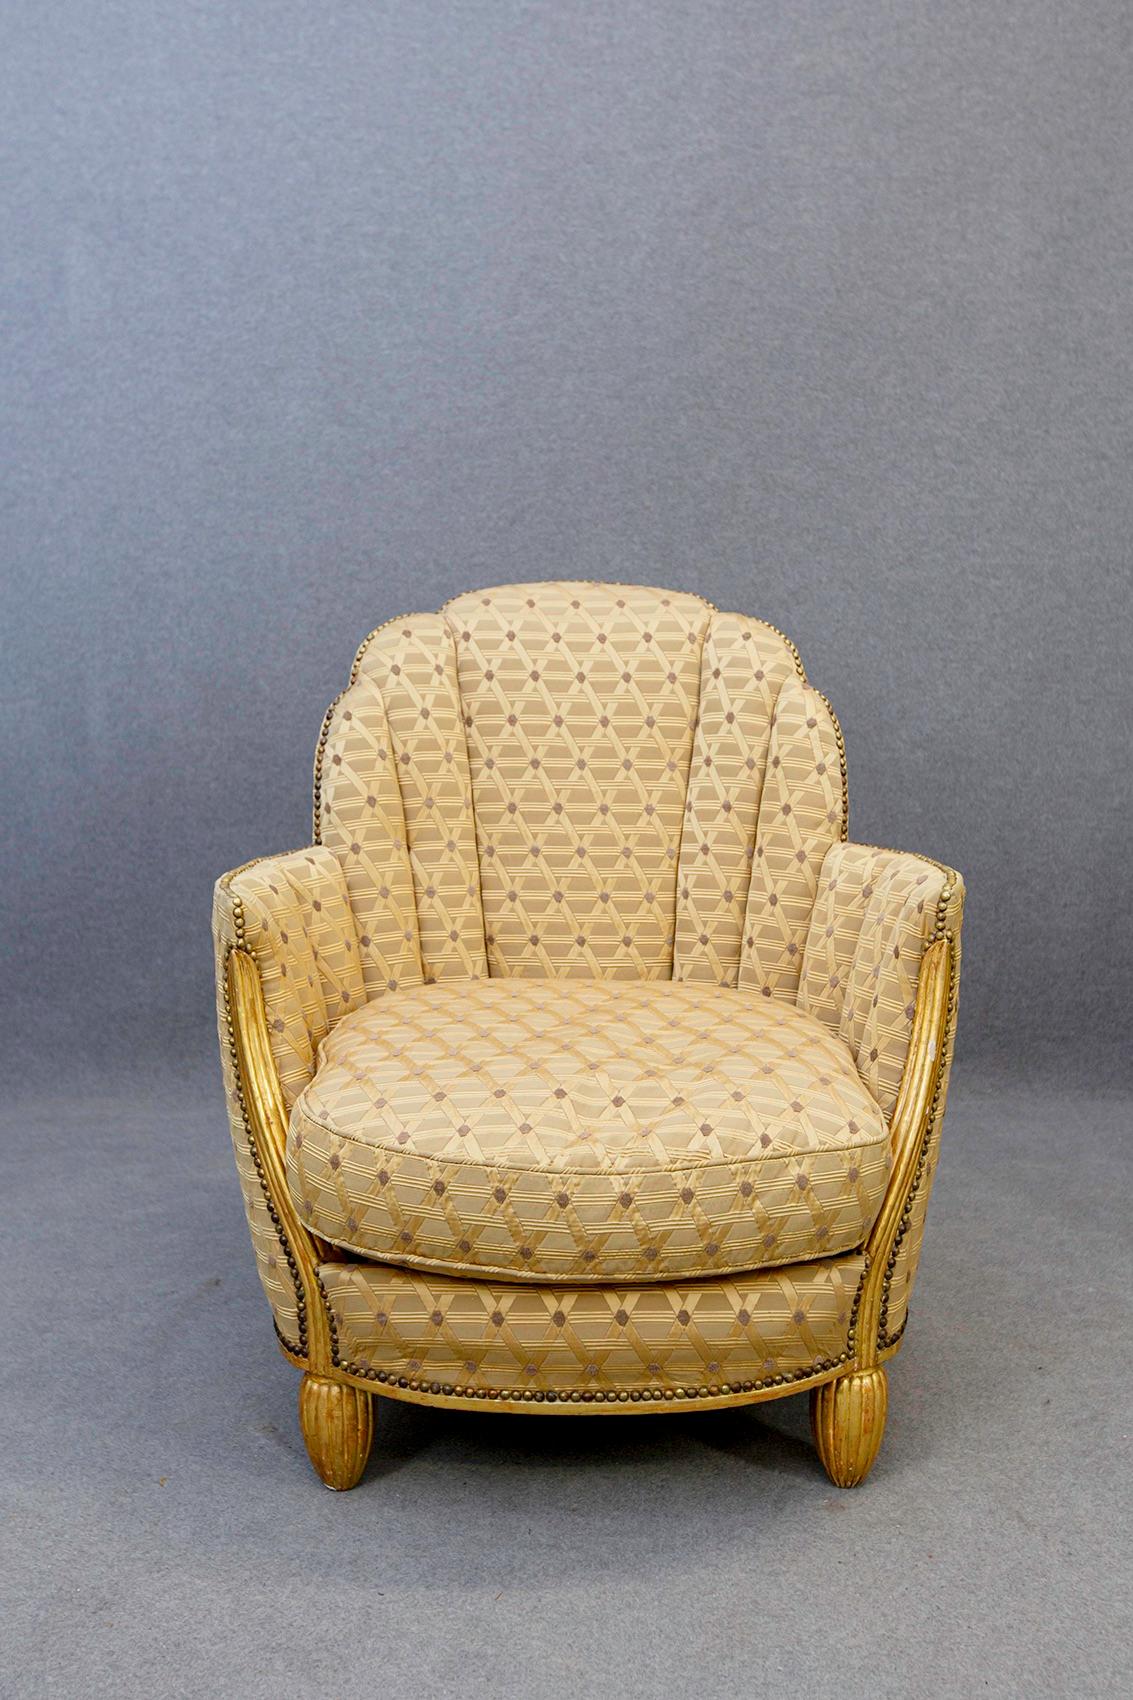 Pair of Paul Follot armchairs from the 1920s and 1930s. The chairs have a wide, curved backrest that extends over solid armrests and rests on legs. The armchairs are made of carved gilded wood. Upholstered in a rich draped fabric with golden yellow